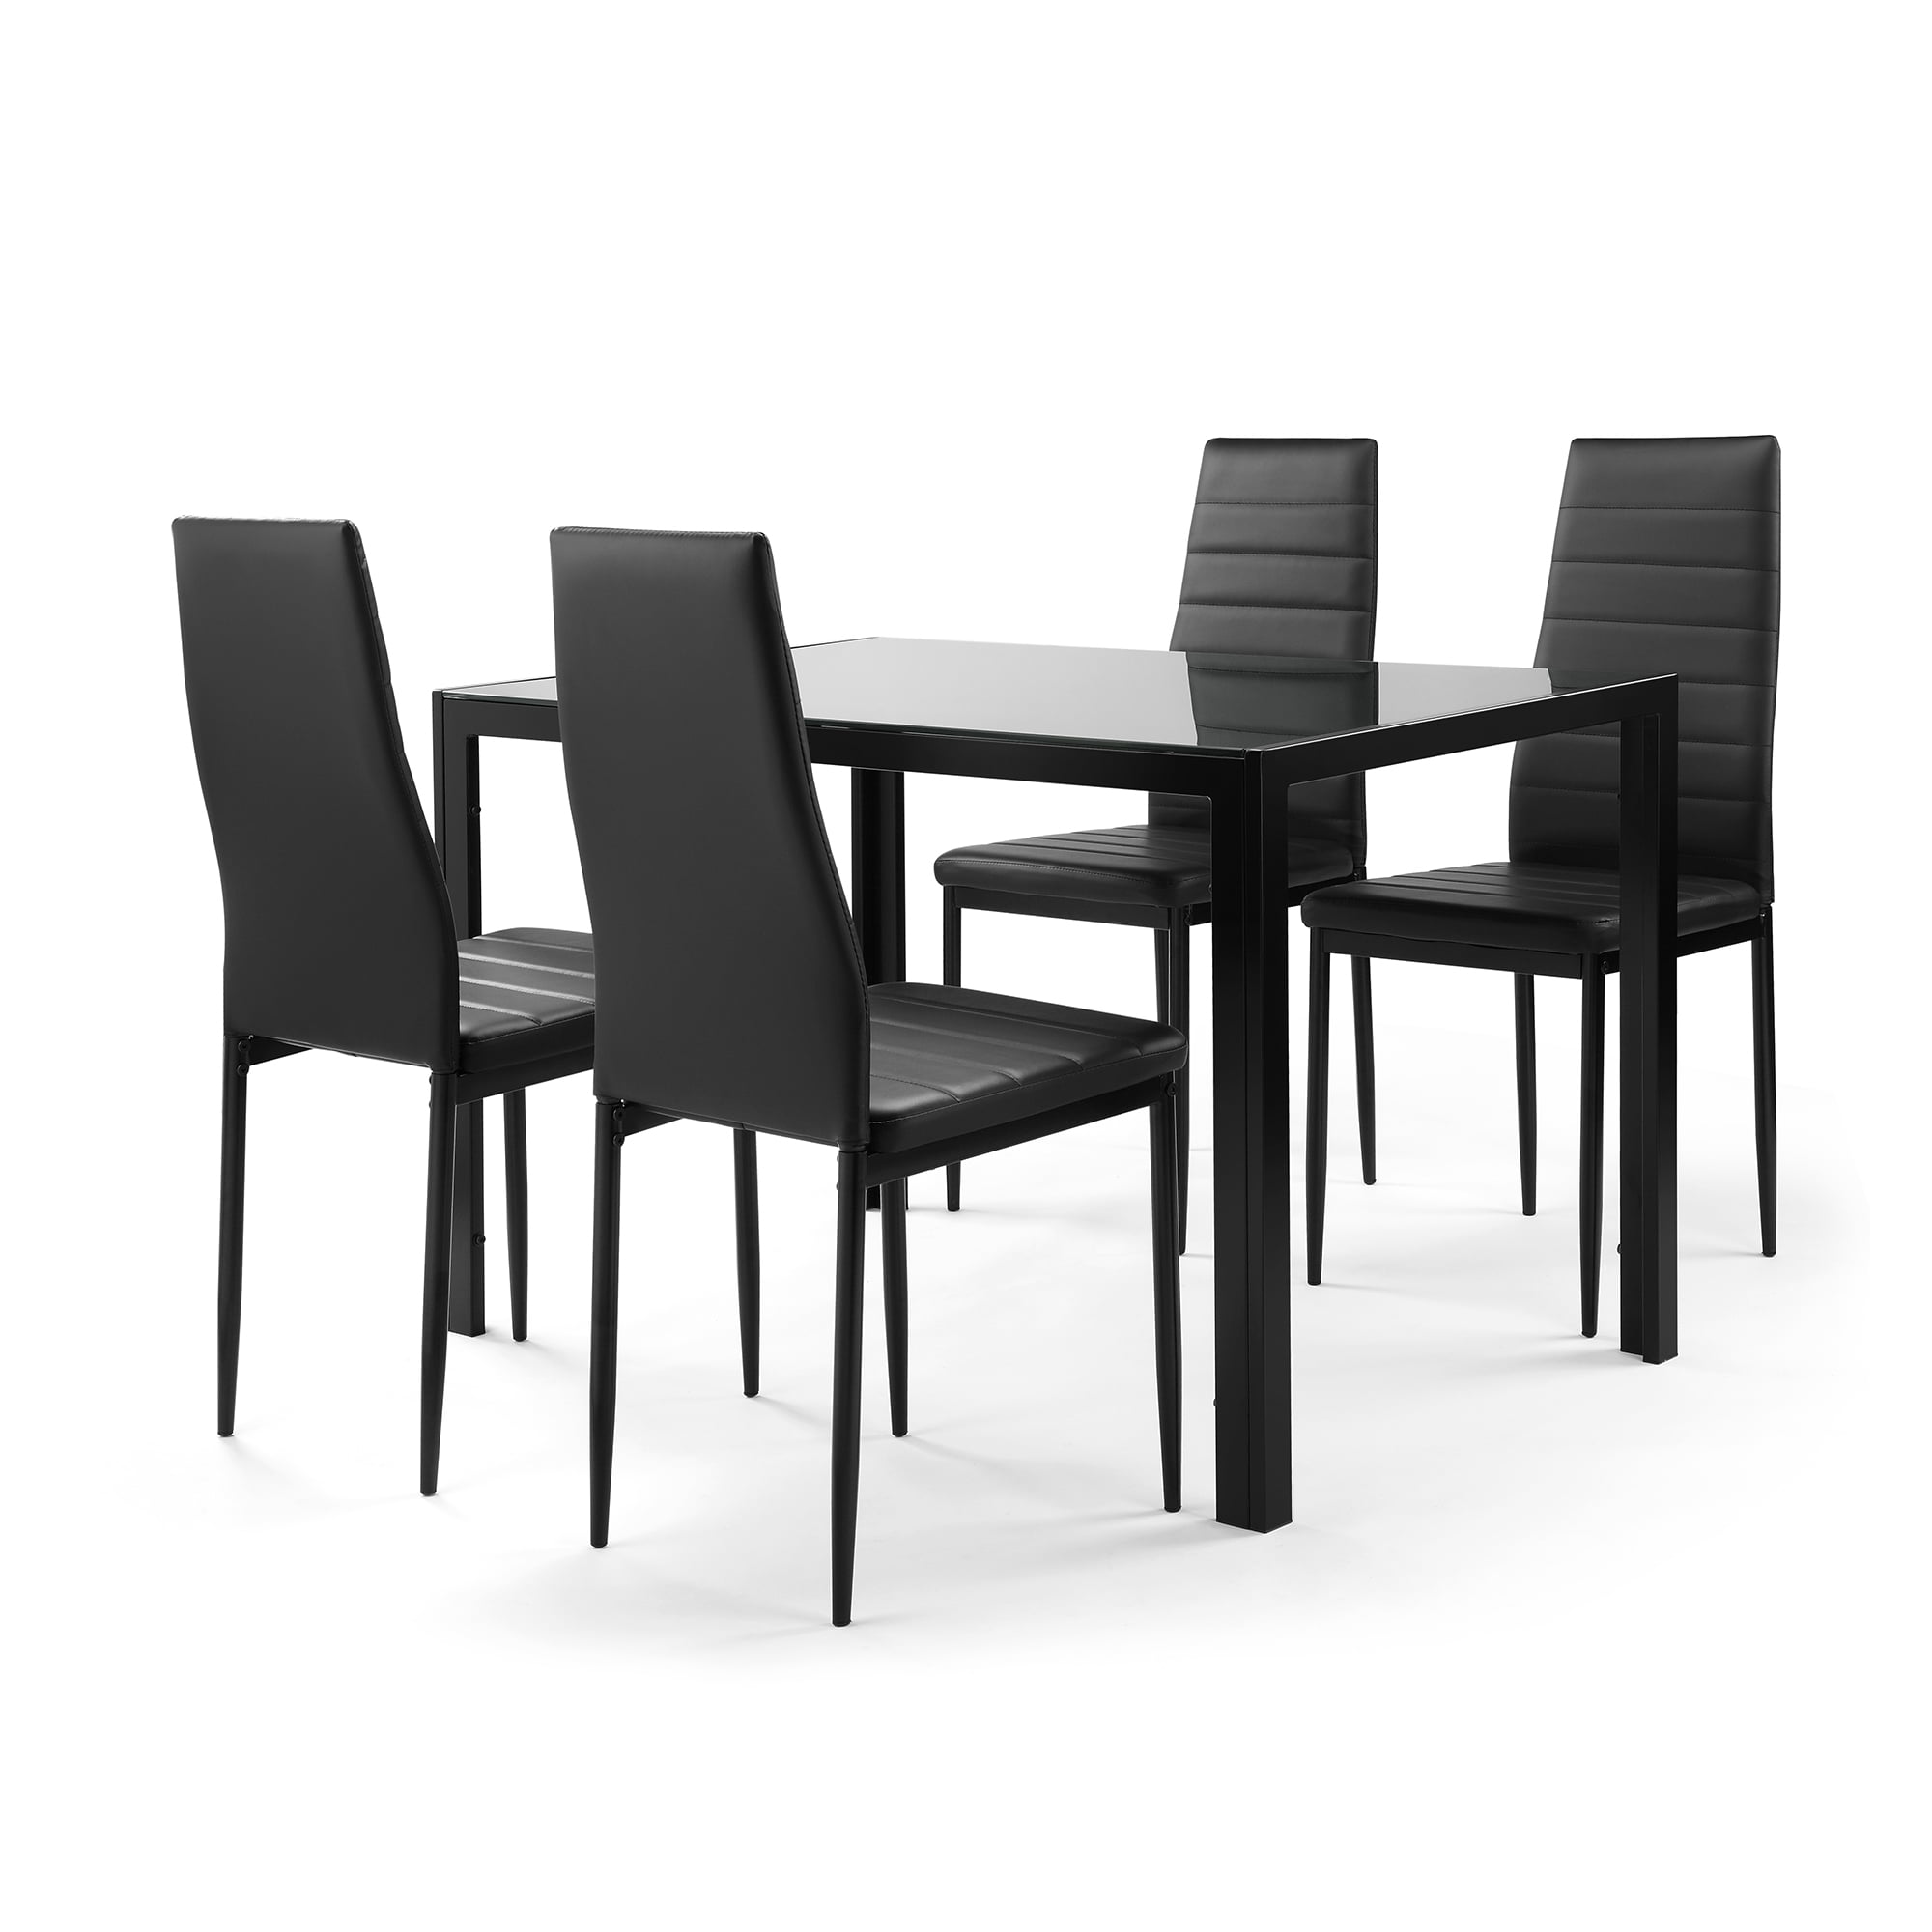 Dinner Table With Dining Chair Sets, Round Folding Tables That Seat 8mm